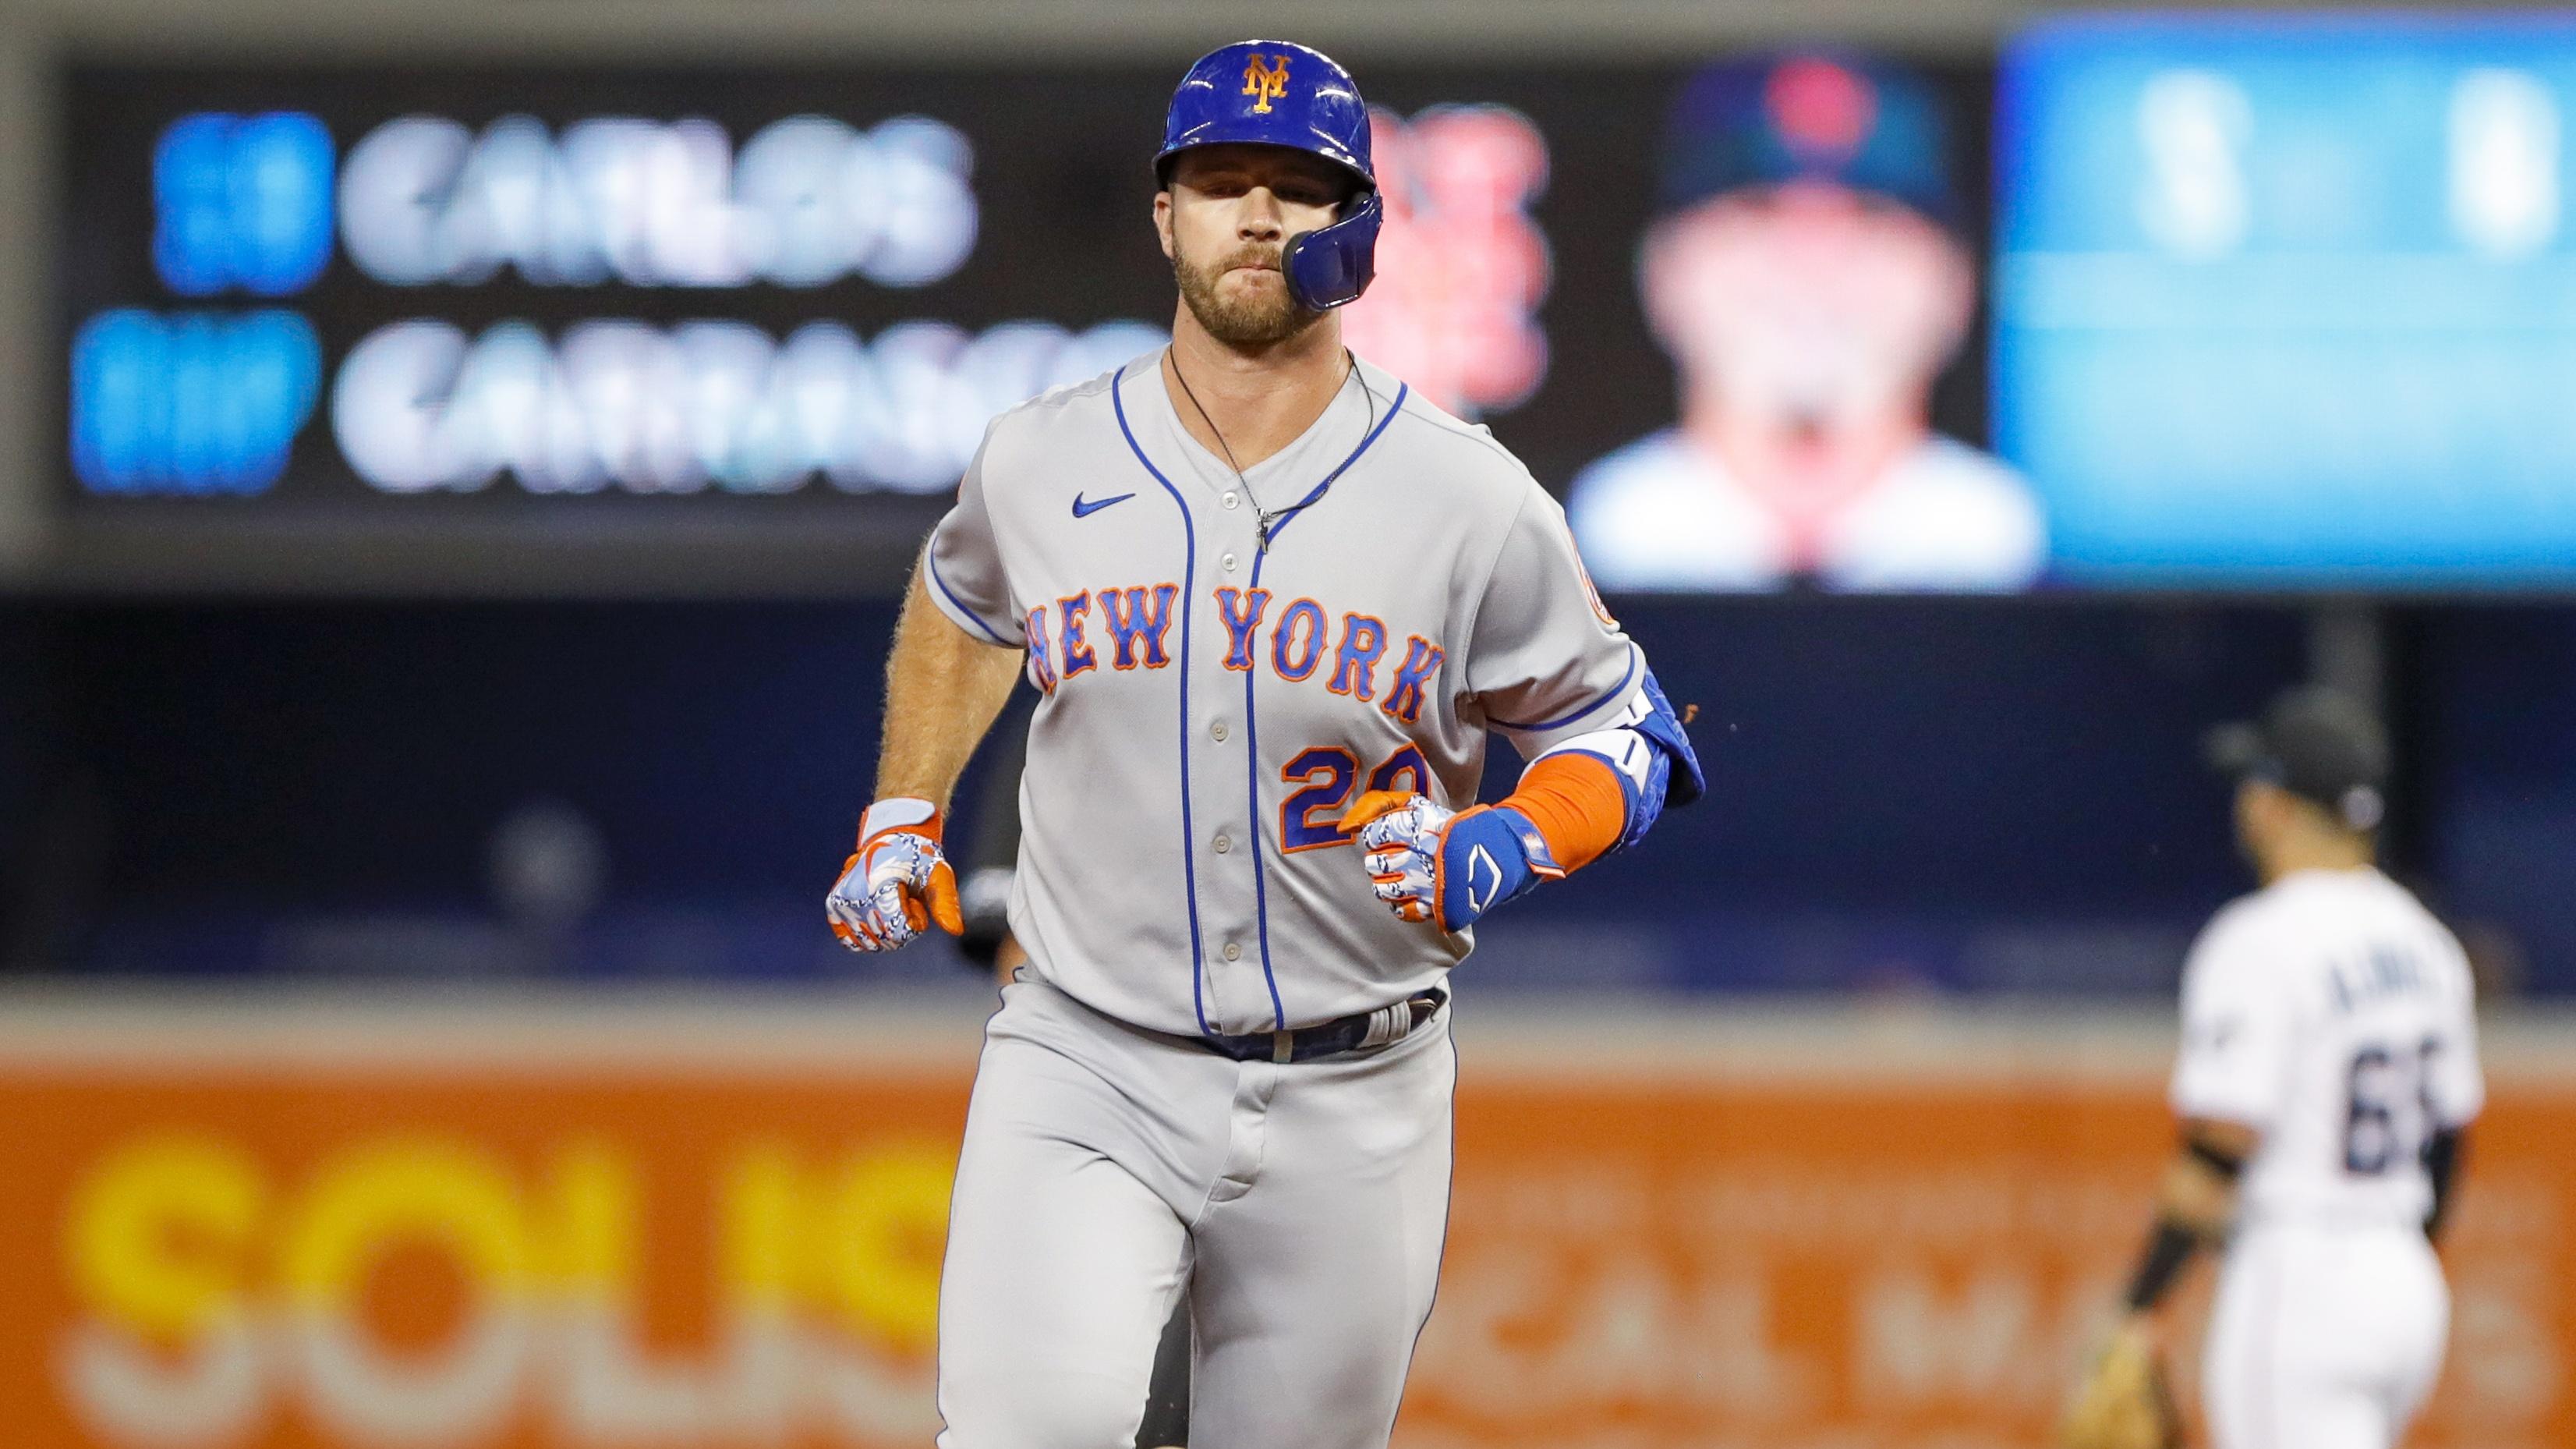 Sep 7, 2021; Miami, Florida, USA; New York Mets first baseman Pete Alonso (20) rounds the bases after hitting a home run during the first inning against the Miami Marlins at loanDepot Park. Mandatory Credit: Sam Navarro-USA TODAY Sports / © Sam Navarro-USA TODAY Sports